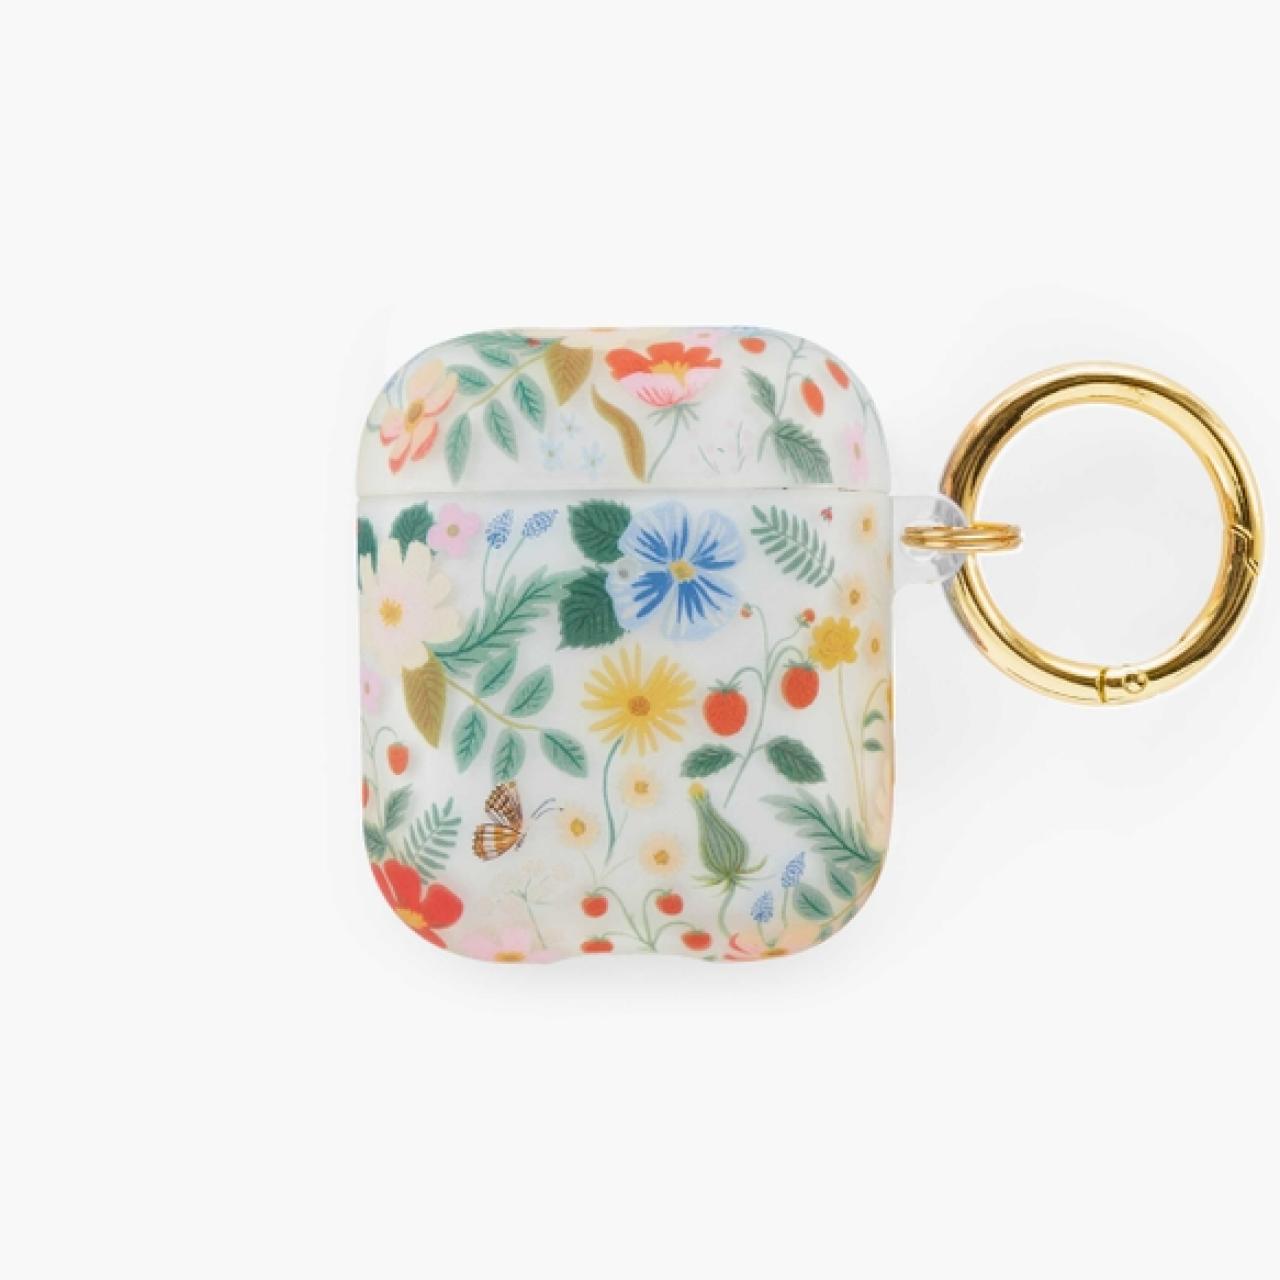 6 designer AirPod cases you might want to gift yourself for